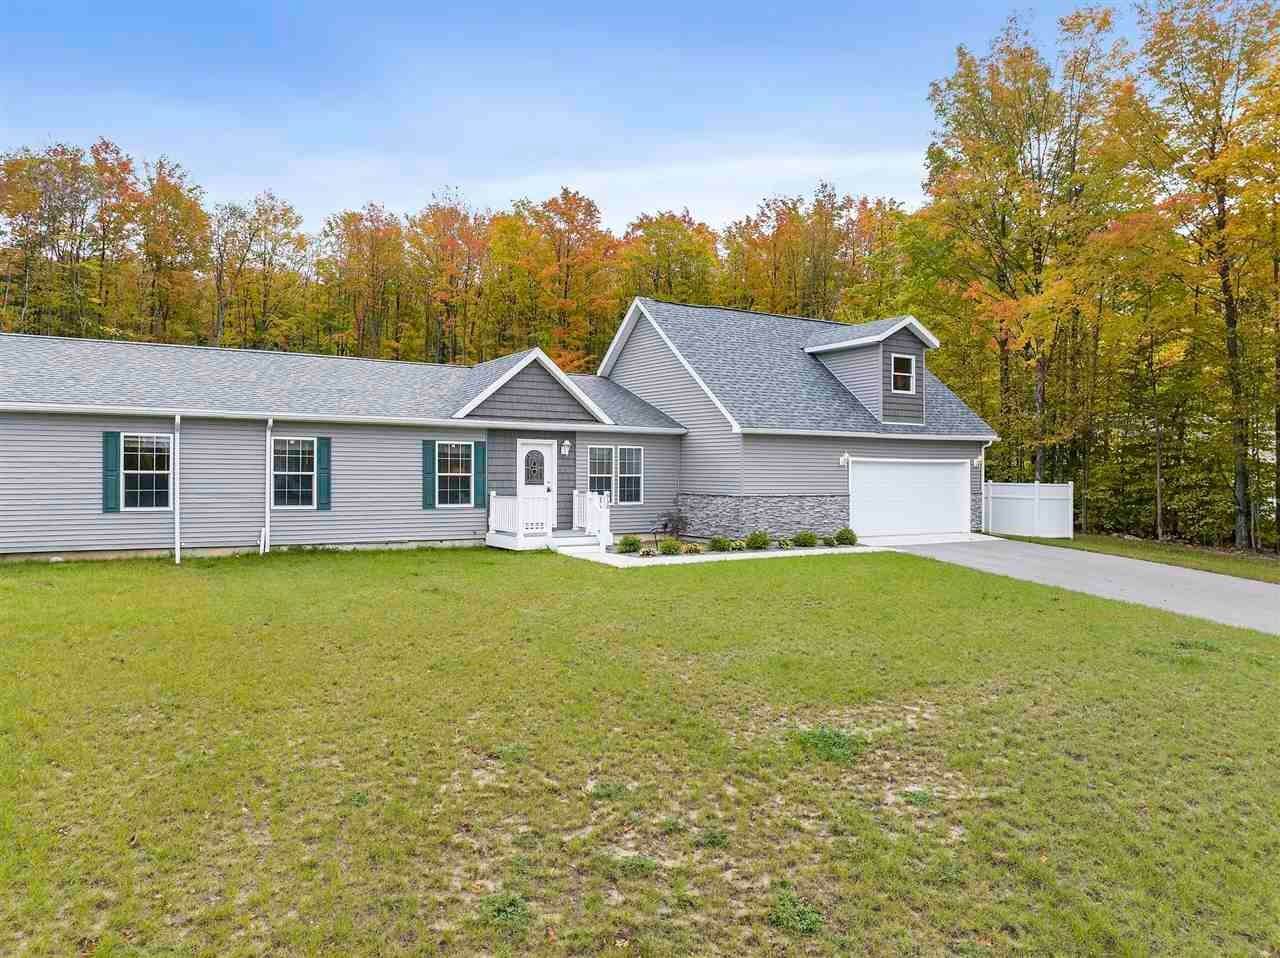 24. Single Family Homes for Sale at 930 Windsong Place Petoskey, Michigan 49770 United States